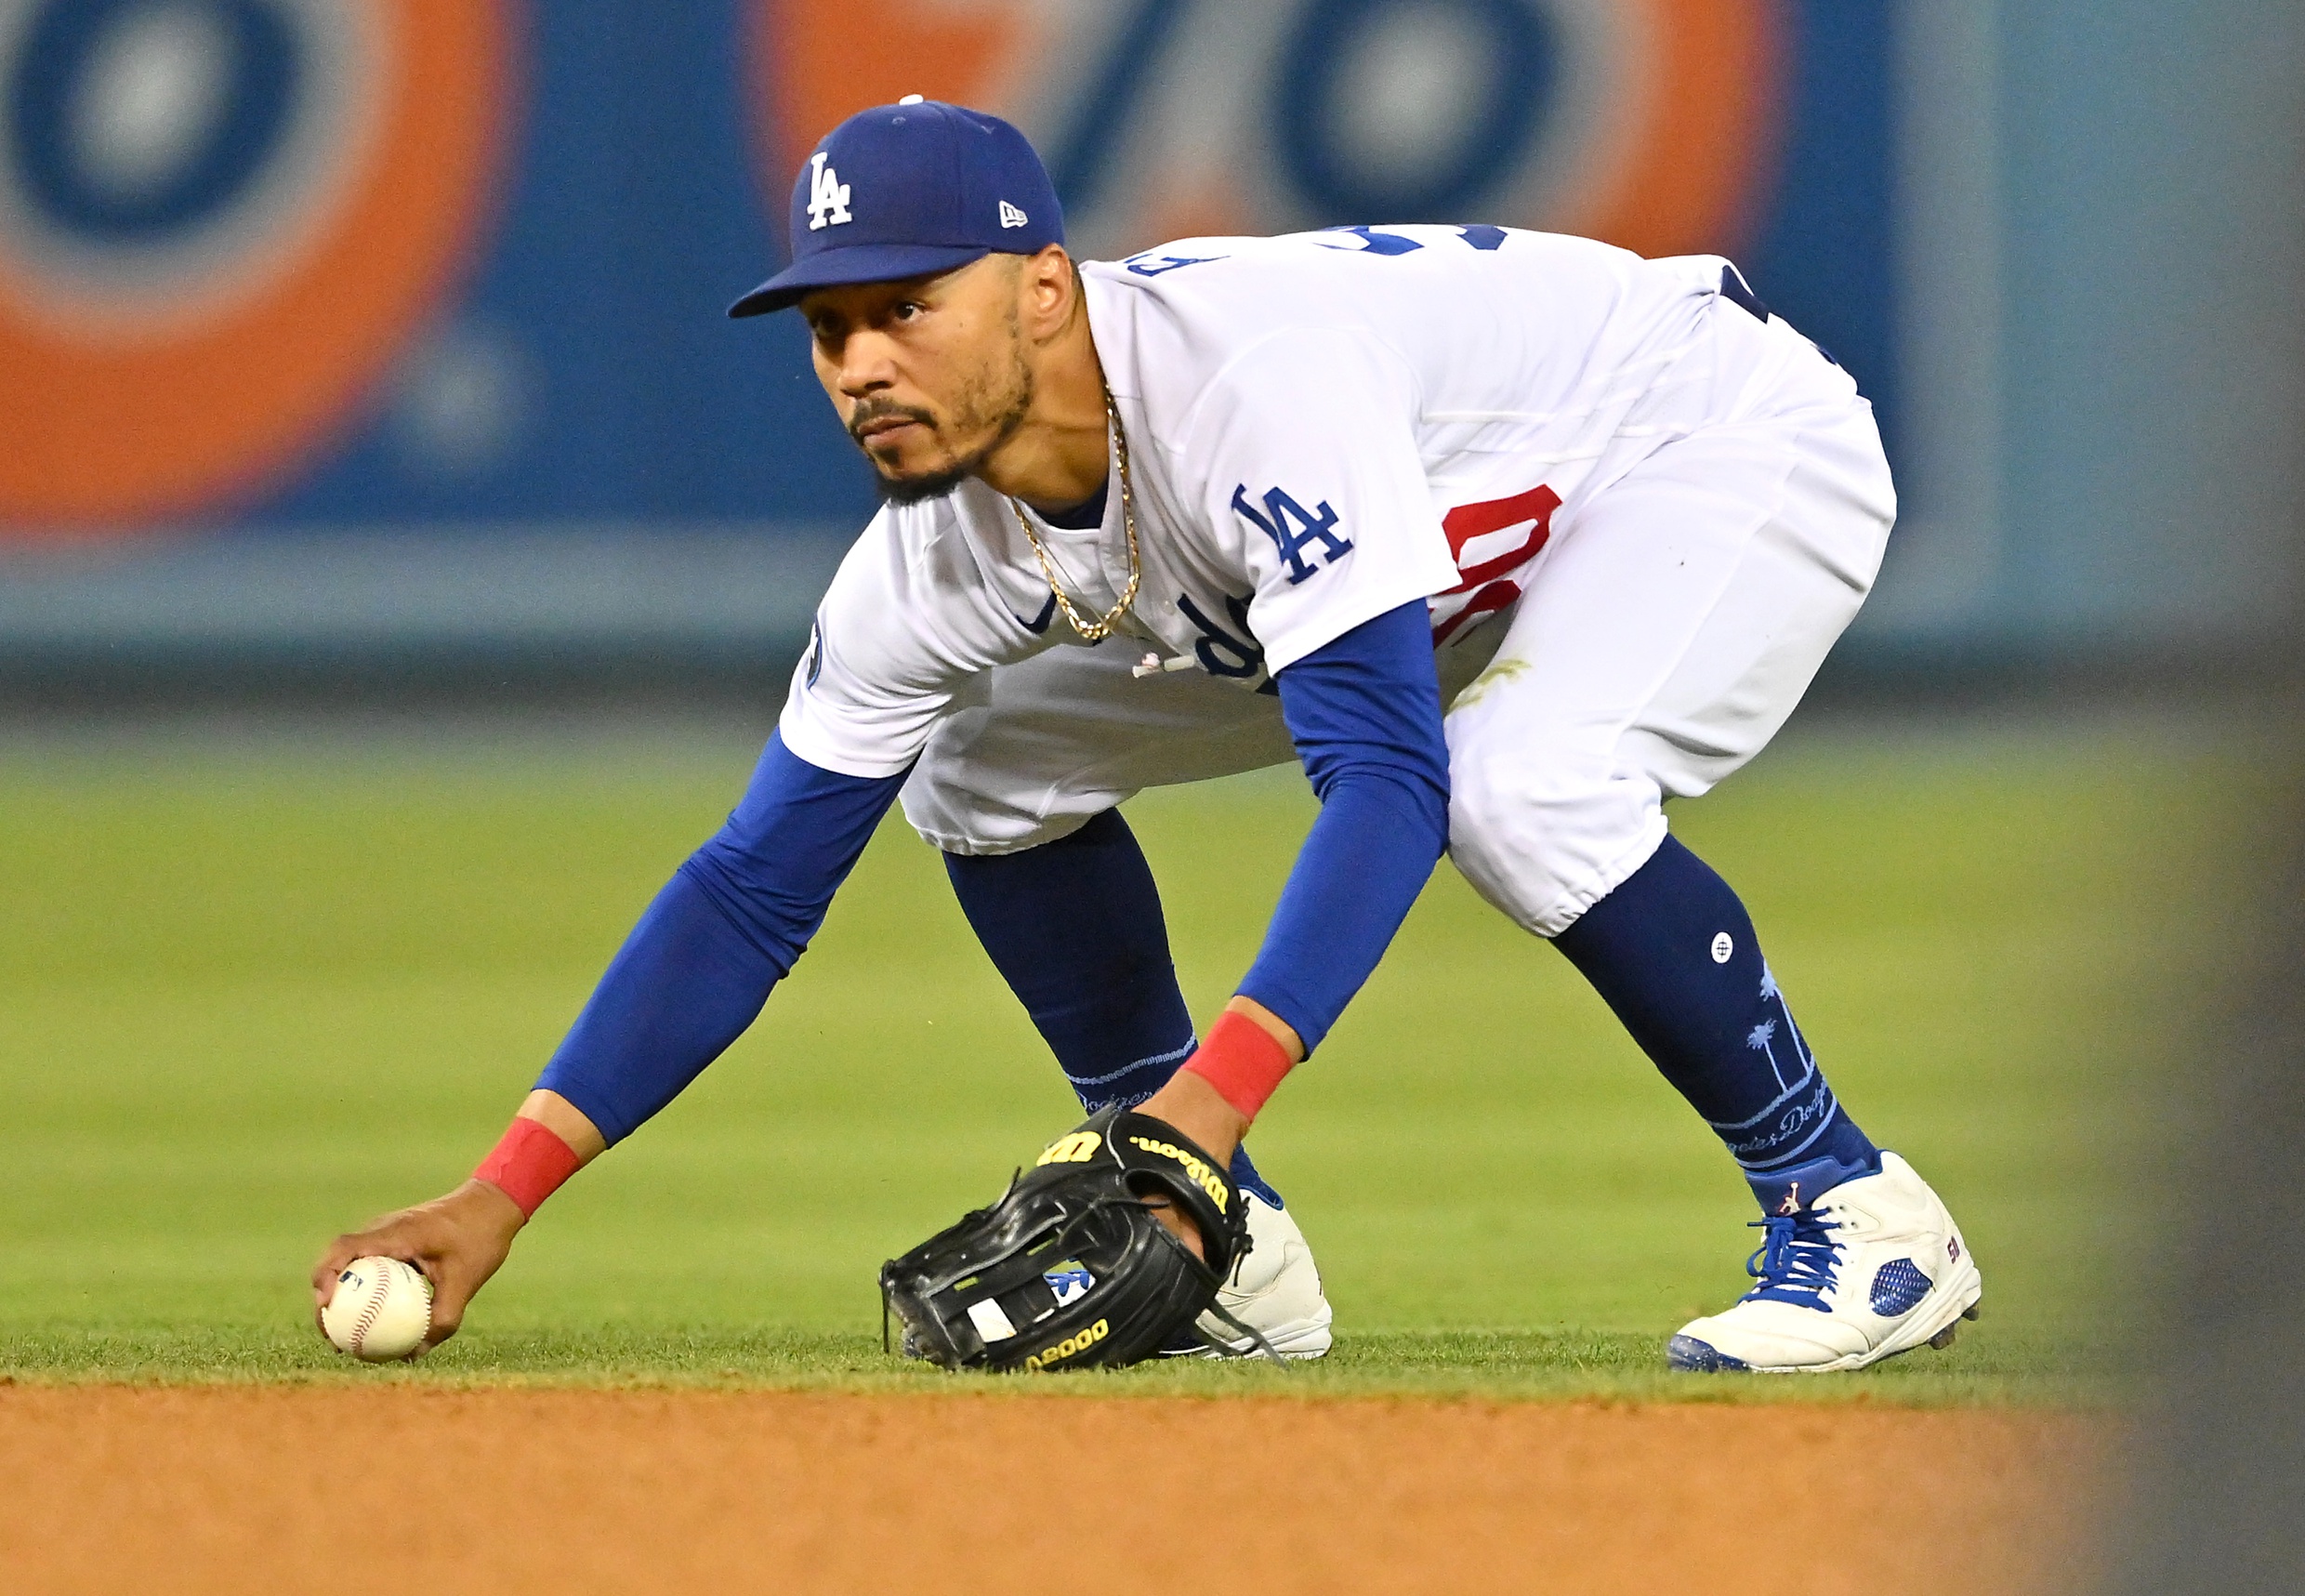 Franchise Stability Has Shown Through With Dodgers' Outfield